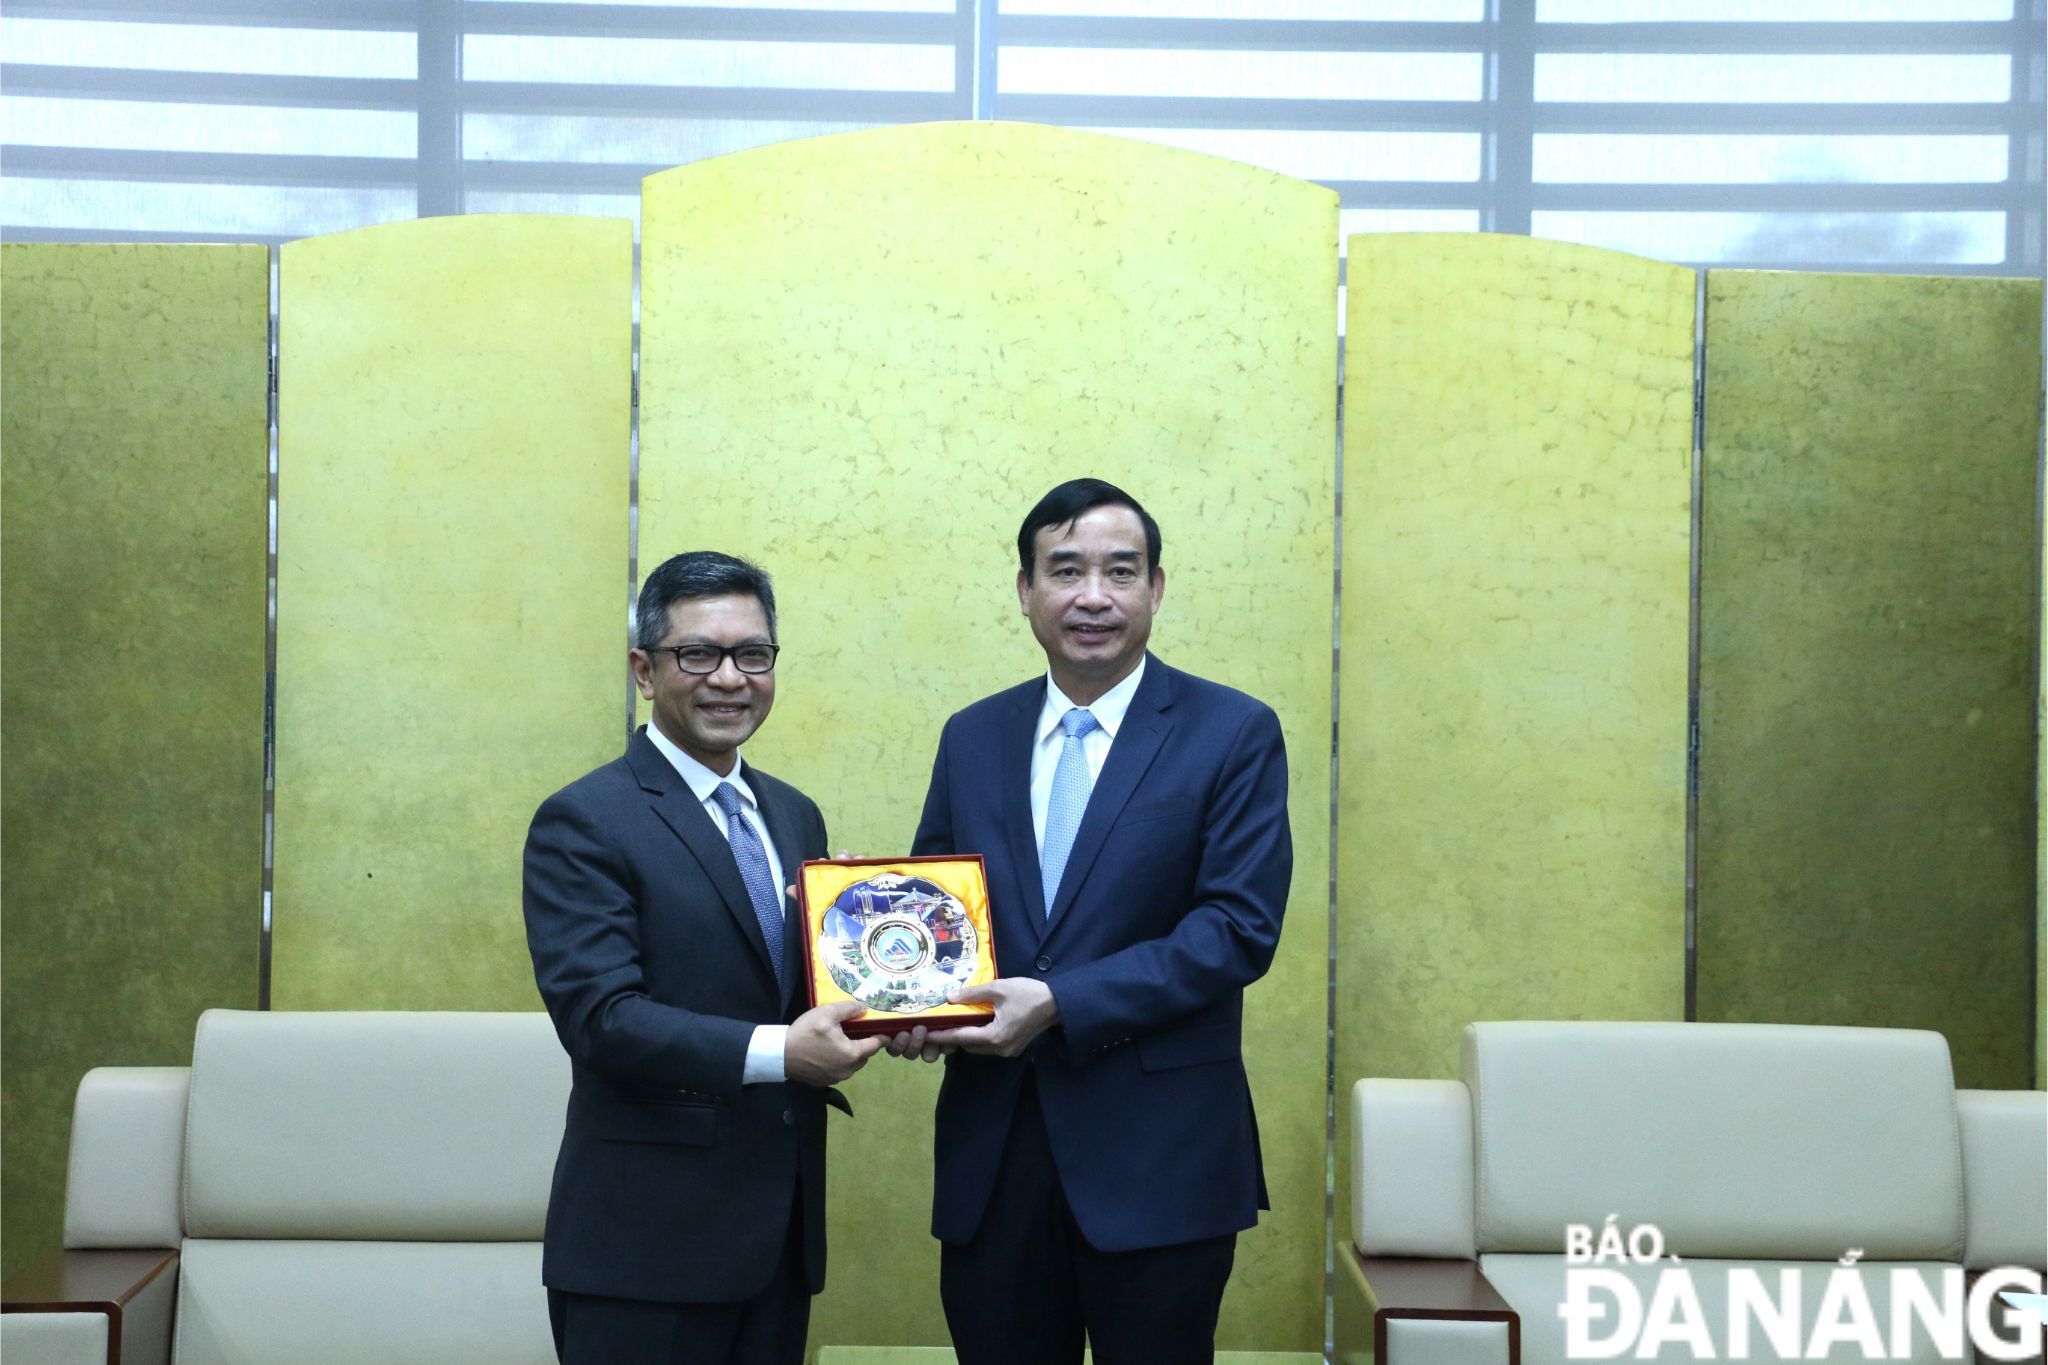 Da Nang People's Committee Chairman Le Trung Chinh (right) presented a souvenir to Indonesian Ambassador to Viet Nam Denny Abdi. Photo: T.PHUONG